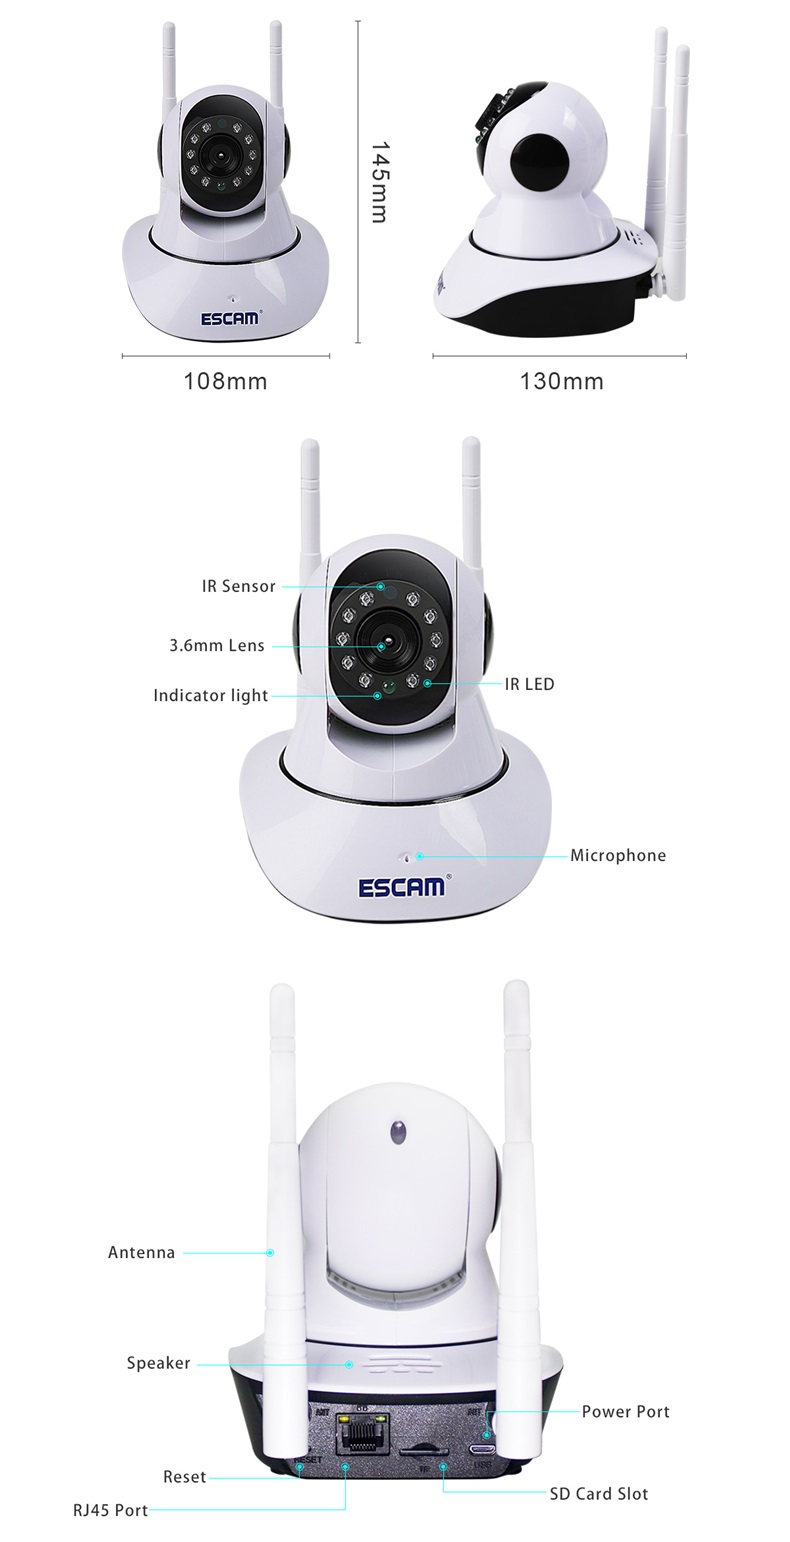 ESCAM G02 Dual Antenna 720P Pan/Tilt WiFi IP IR Camera Support ONVIF Max Up to 128GB Video Monitor 15